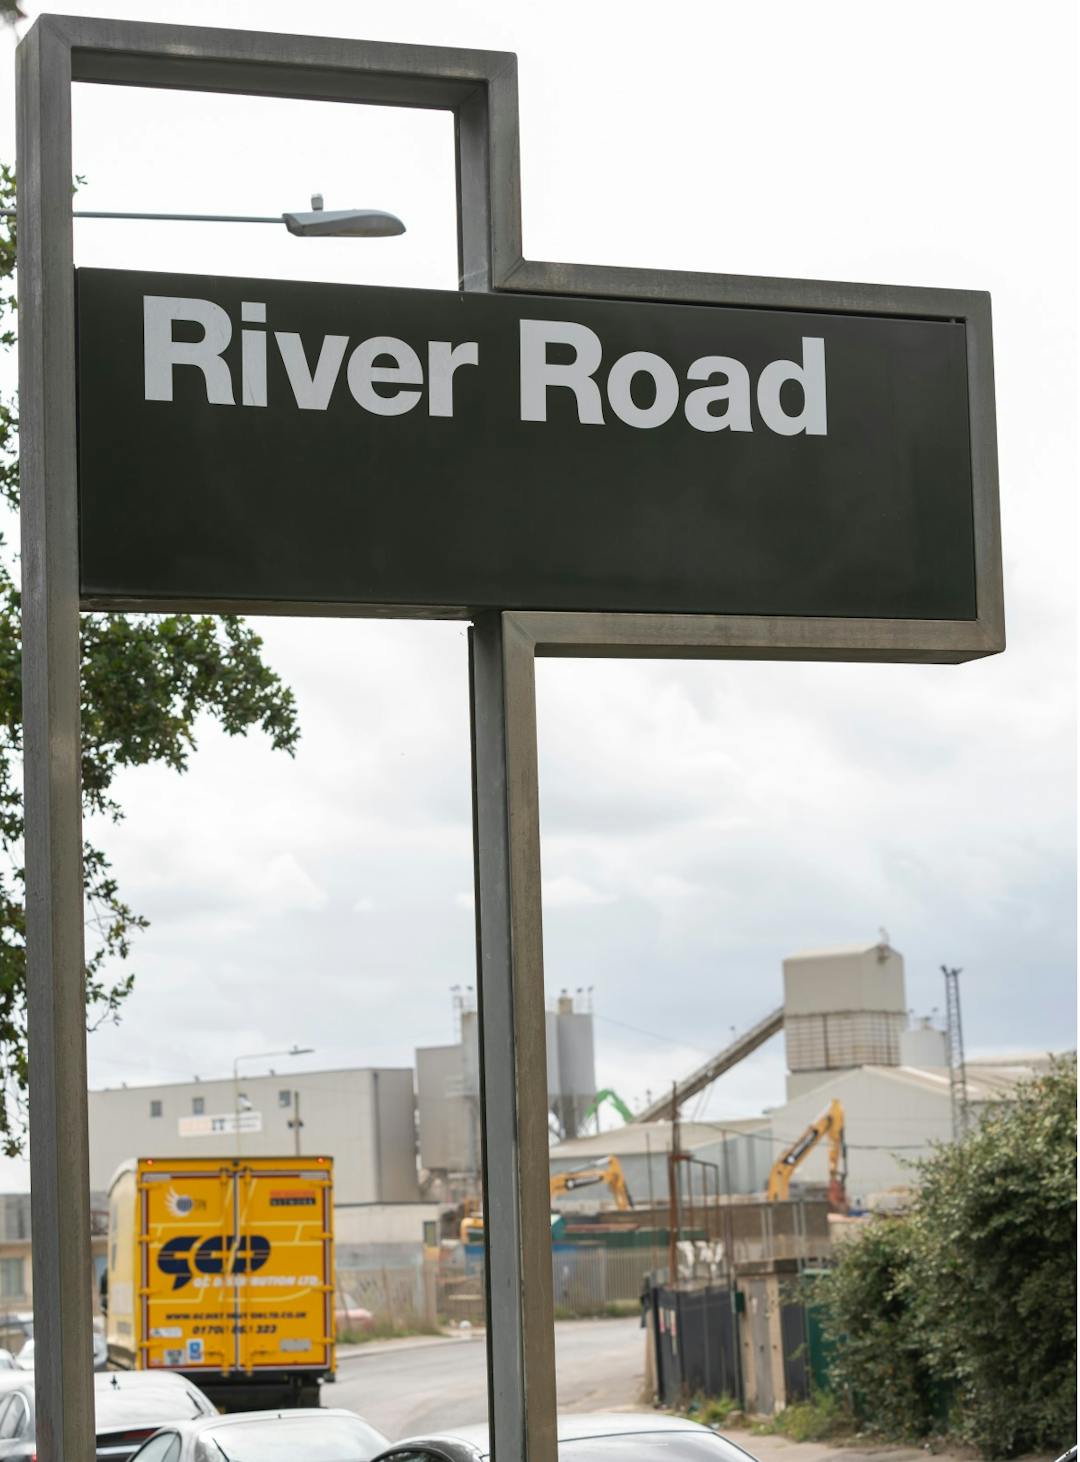 The sign at the entrance to the River Road Industrial area